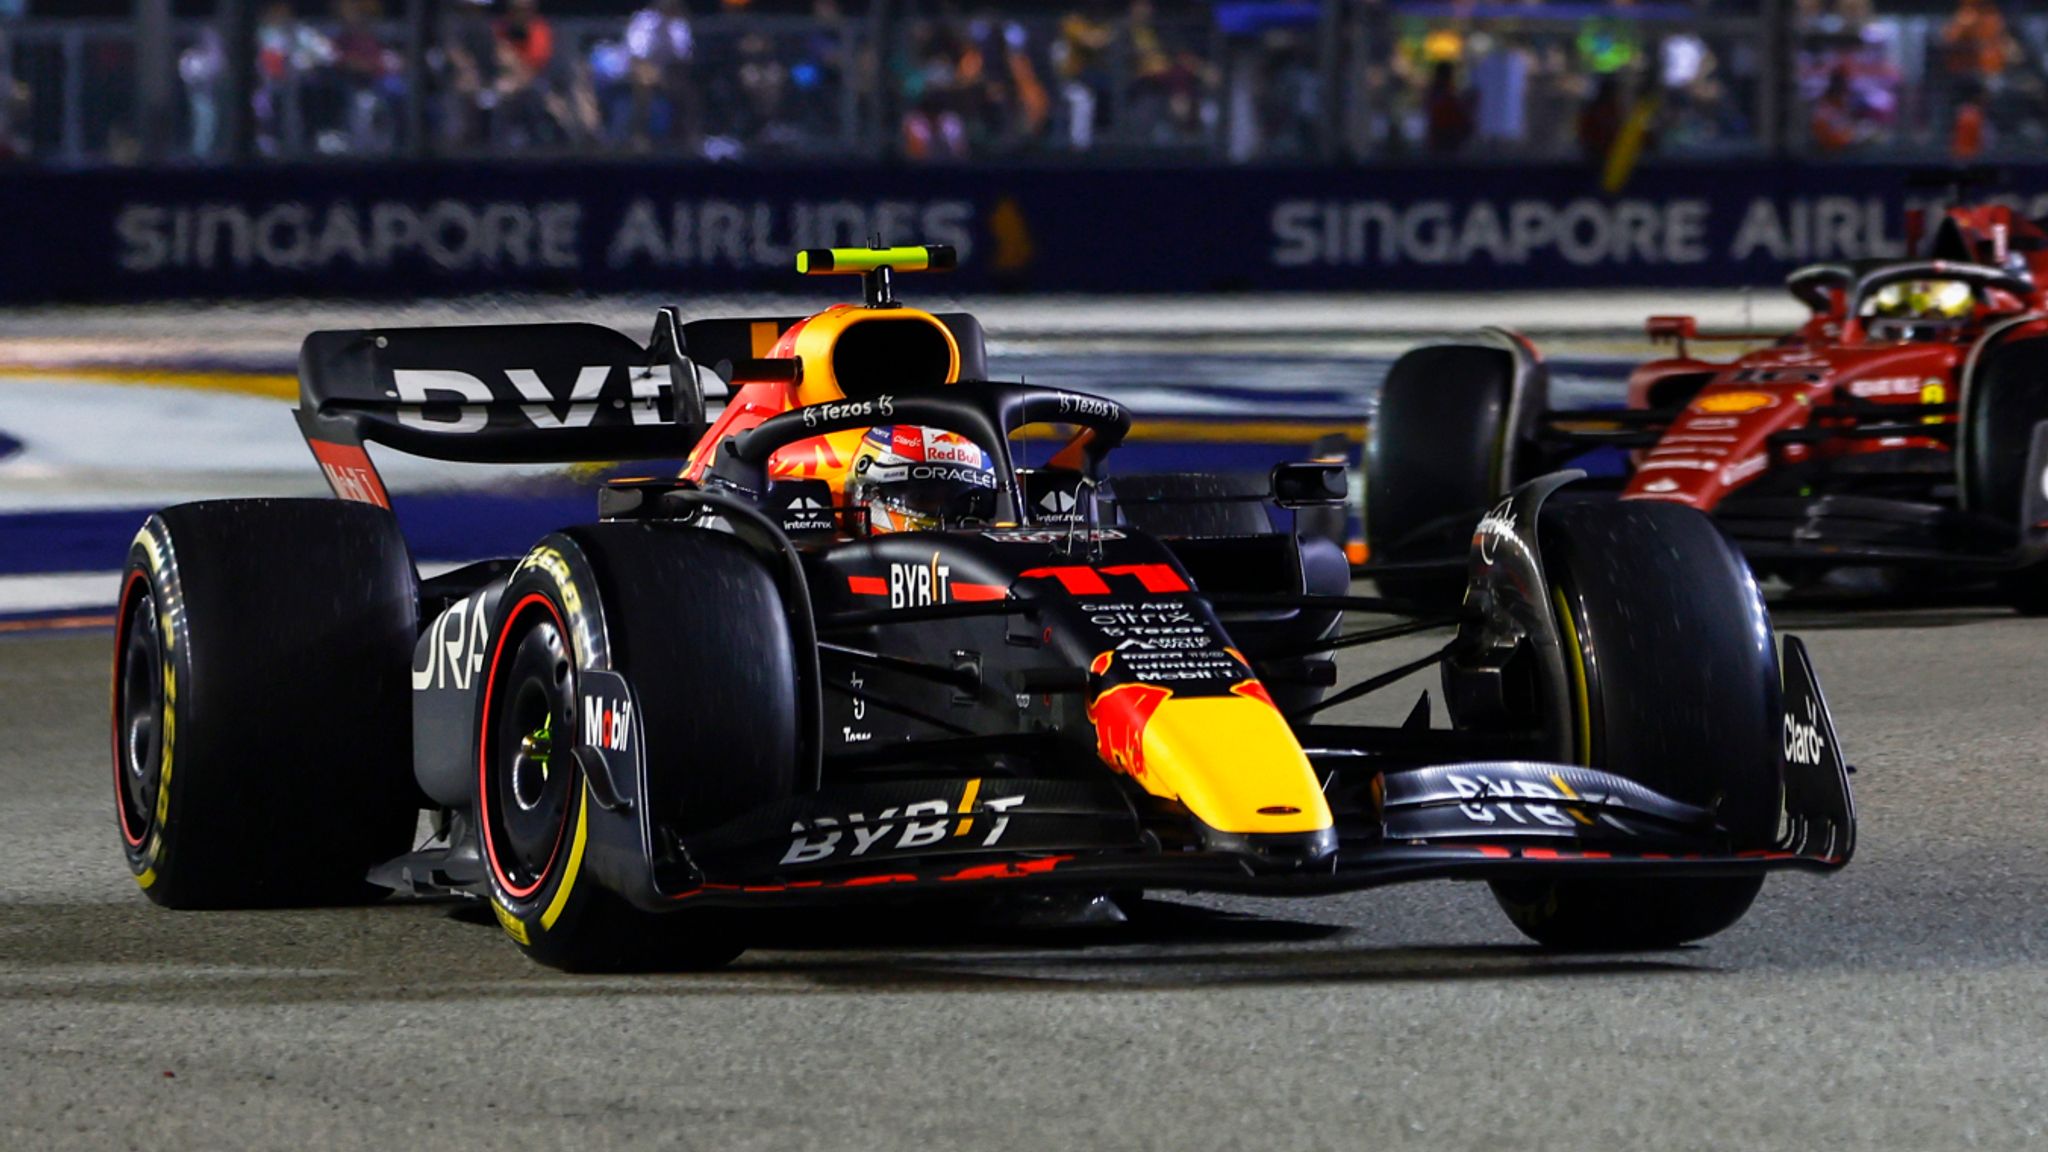 Singapore Grand Prix: Max Verstappen fails to seal title, Sergio Perez holds off Charles Leclerc